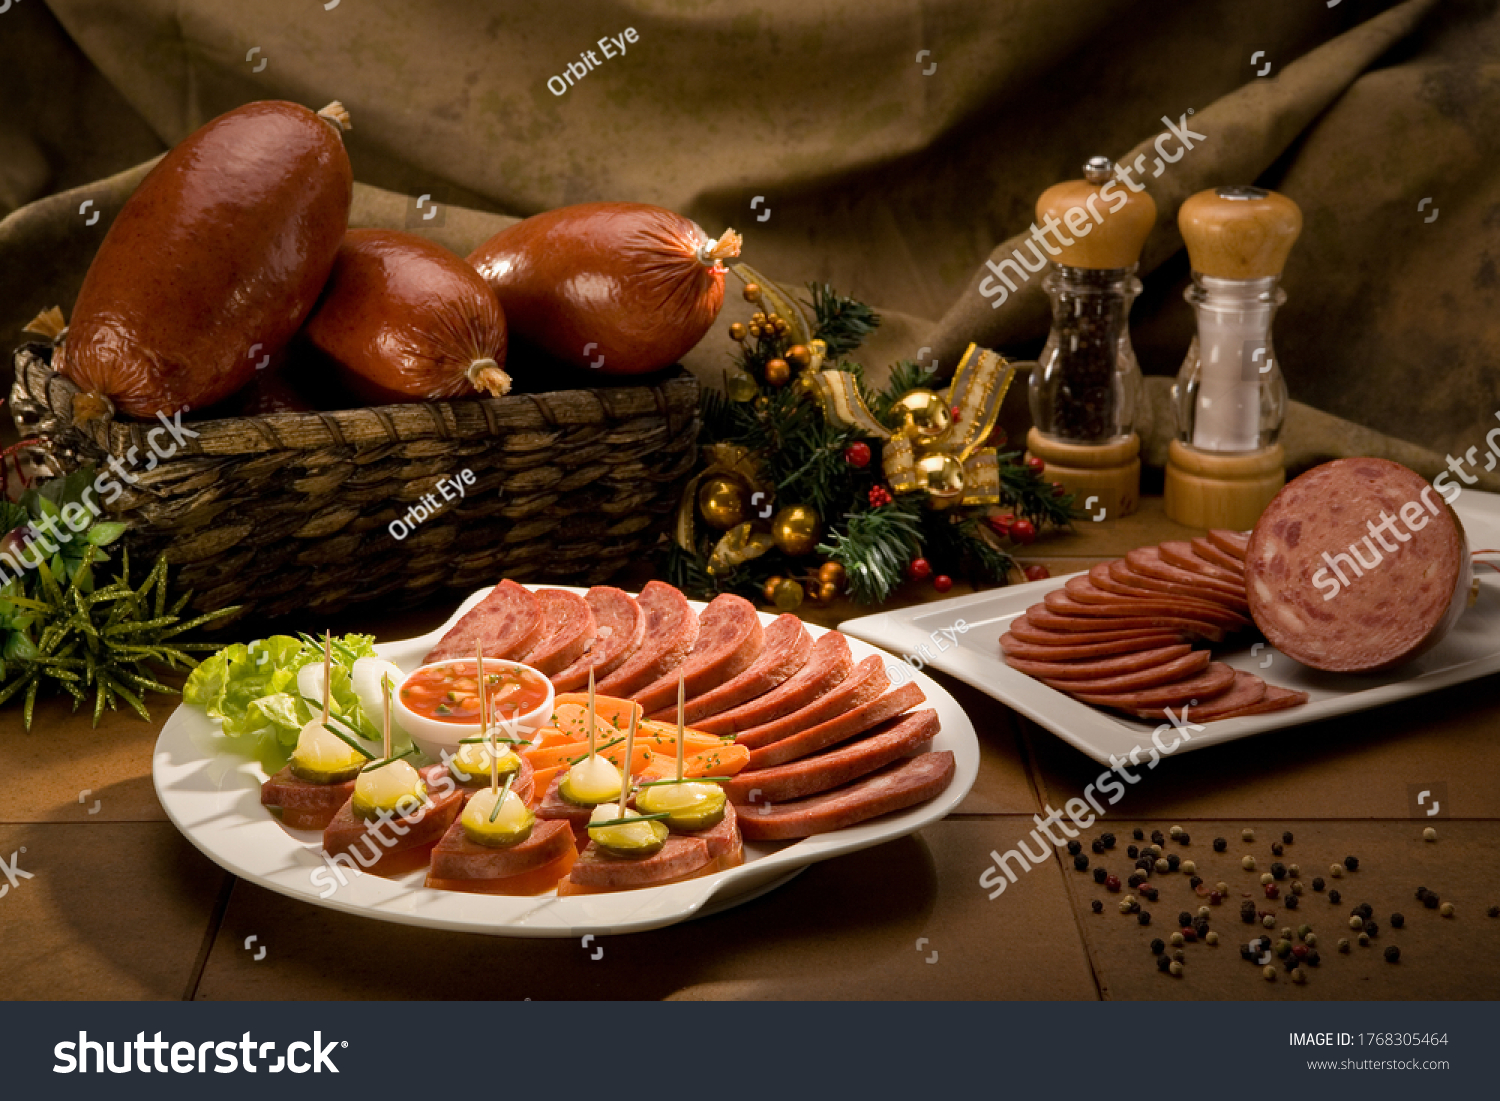 Still life of many and different food products, such as ham, salami, carrots, pickles and sauces, with some Christmas decorations. #1768305464